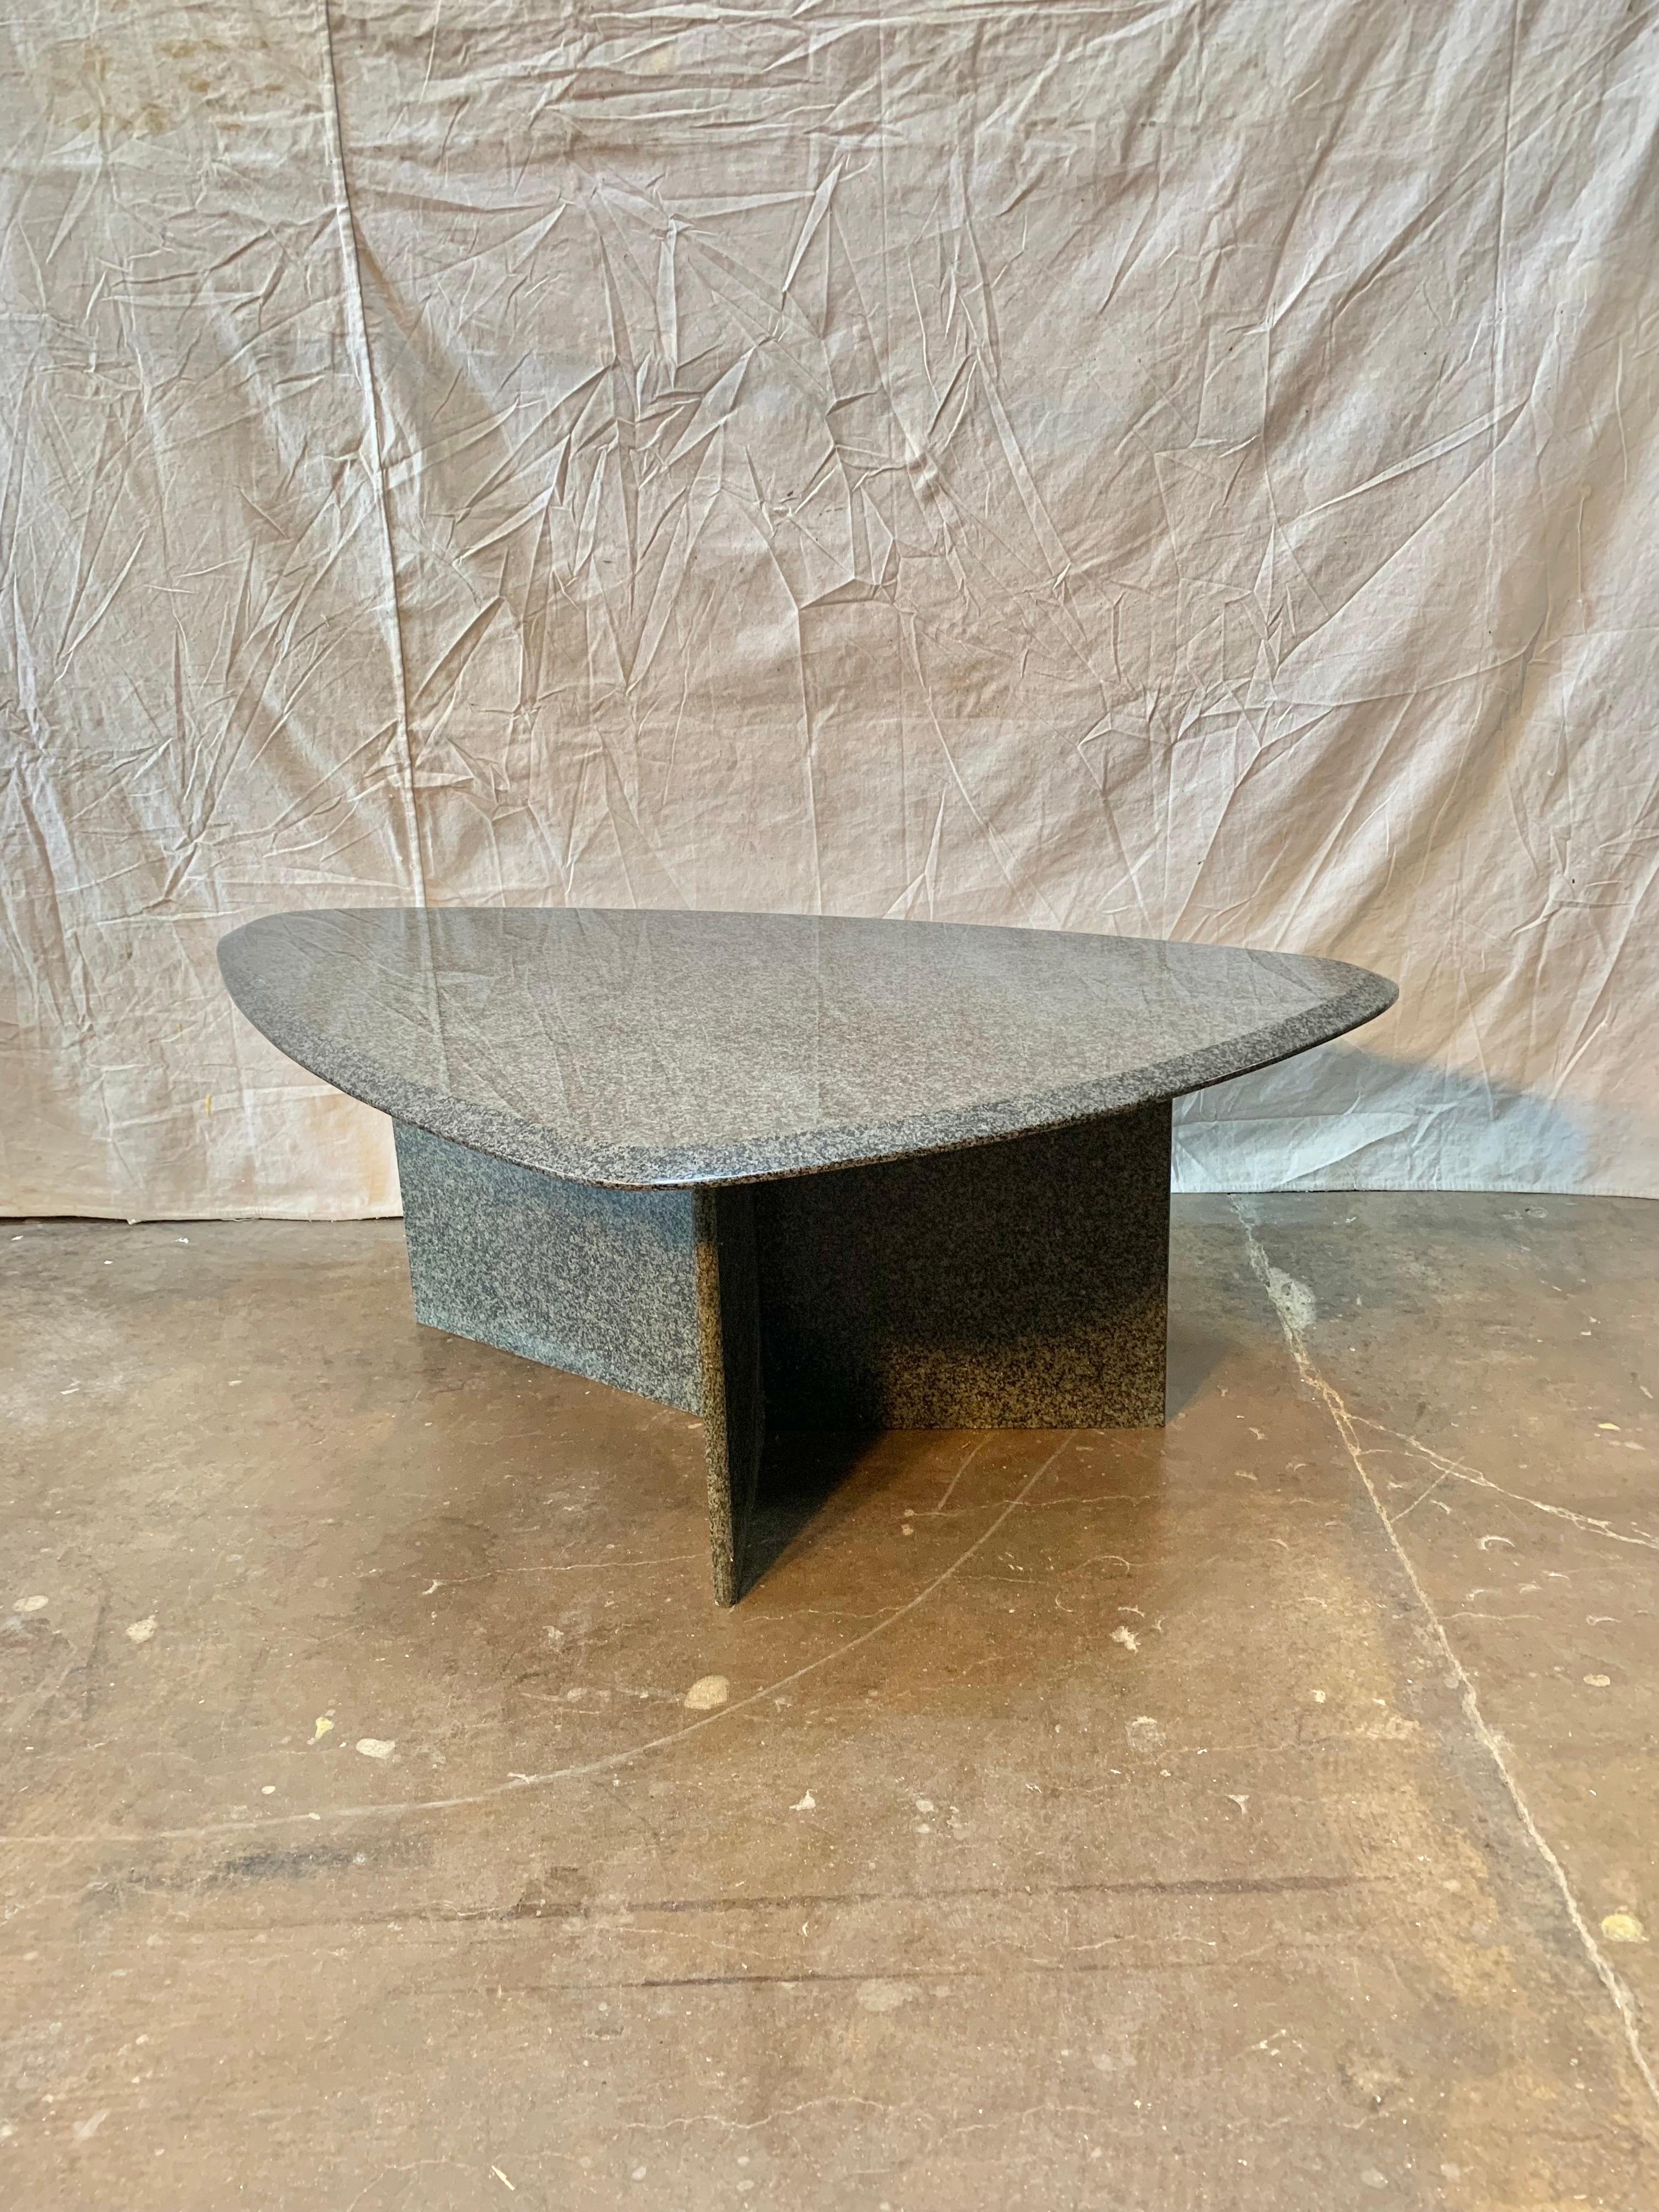 Found in the South of France, this Mid Century Modern Italian coffee table is made of granite with specs of black and multiple greys. The beveled top is triangular in shape and is attached to a 